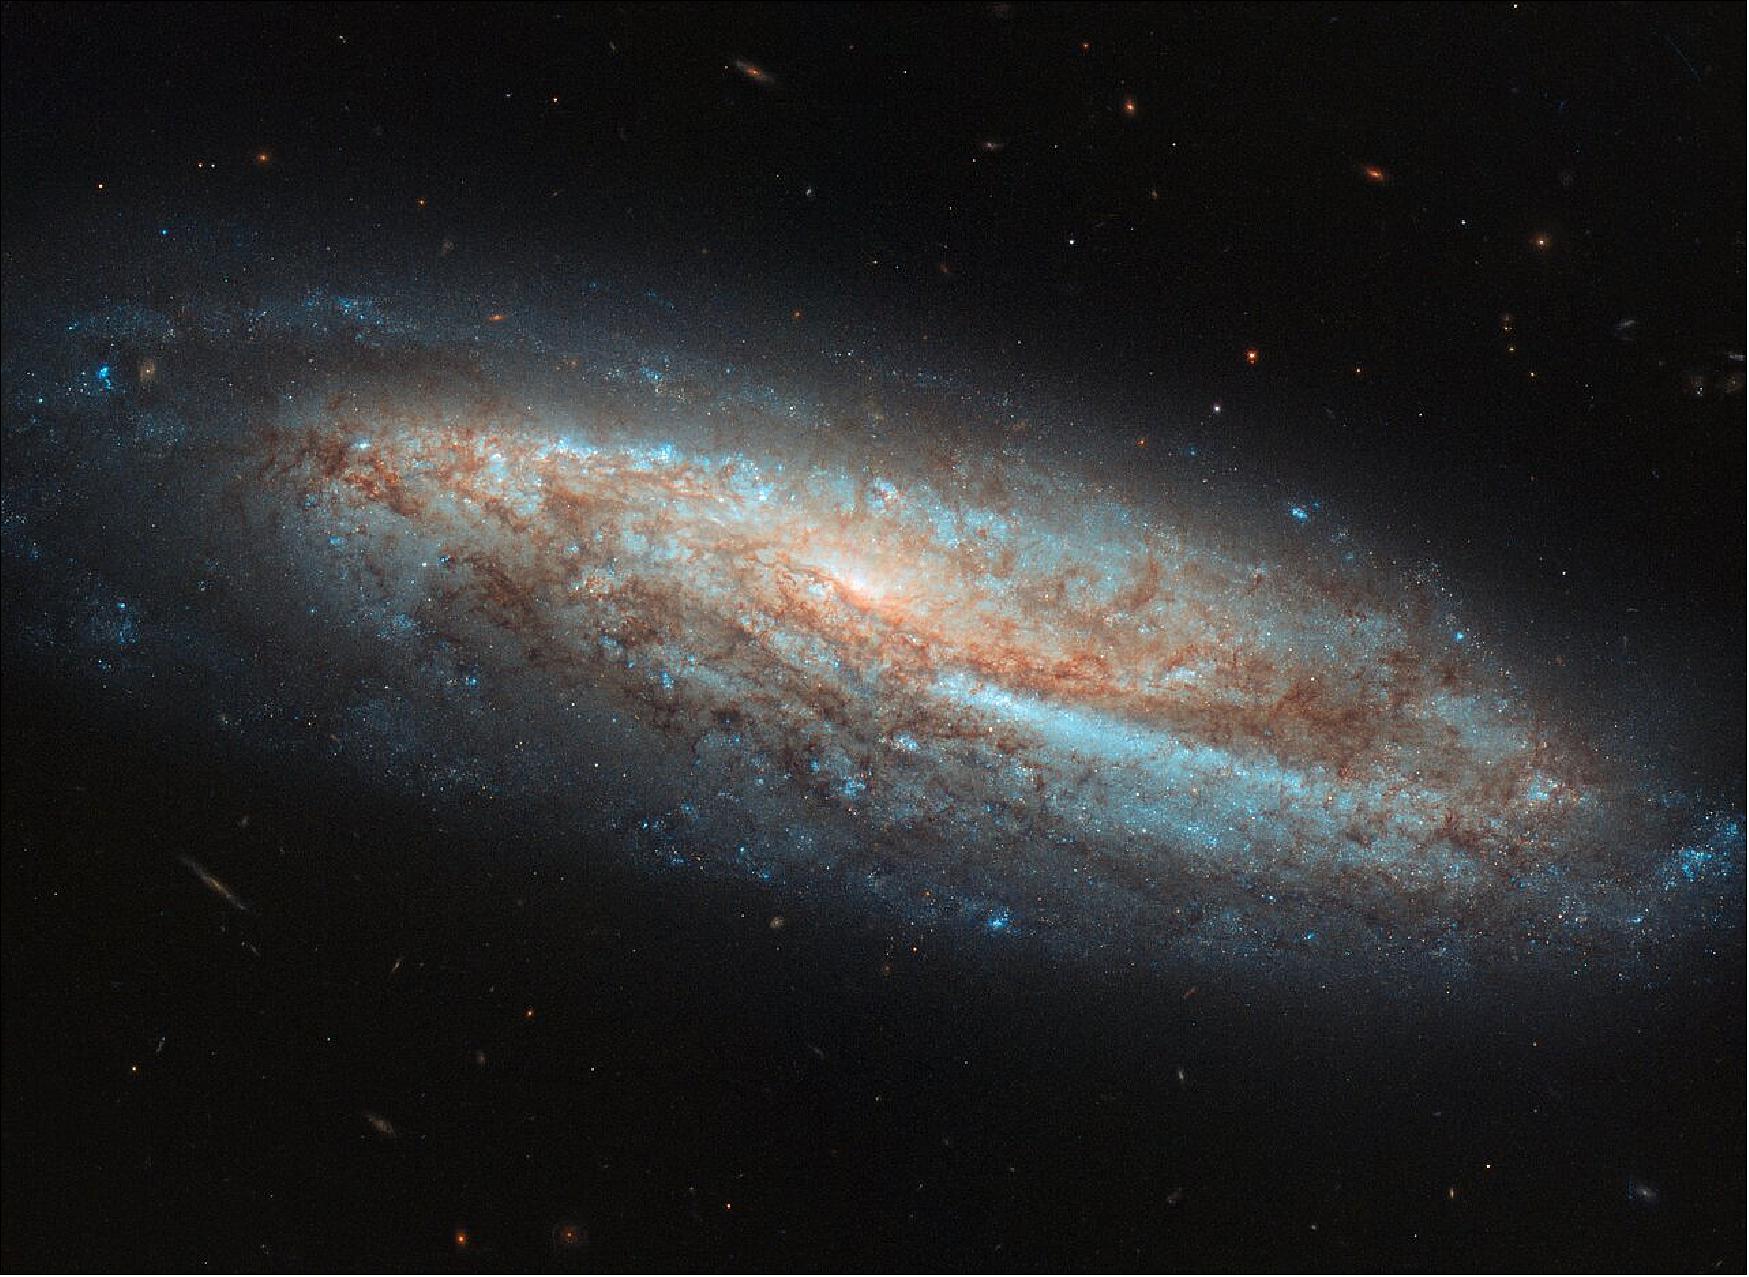 Figure 90: The galaxy depicted in this Picture of the Week is a barred spiral known as NGC 7541, seen here as viewed by the NASA/ESA Hubble Space Telescope, in the constellation of Pisces (The Fishes), image credit: ESA/Hubble & NASA, A. Riess et al.; CC BY 4.0